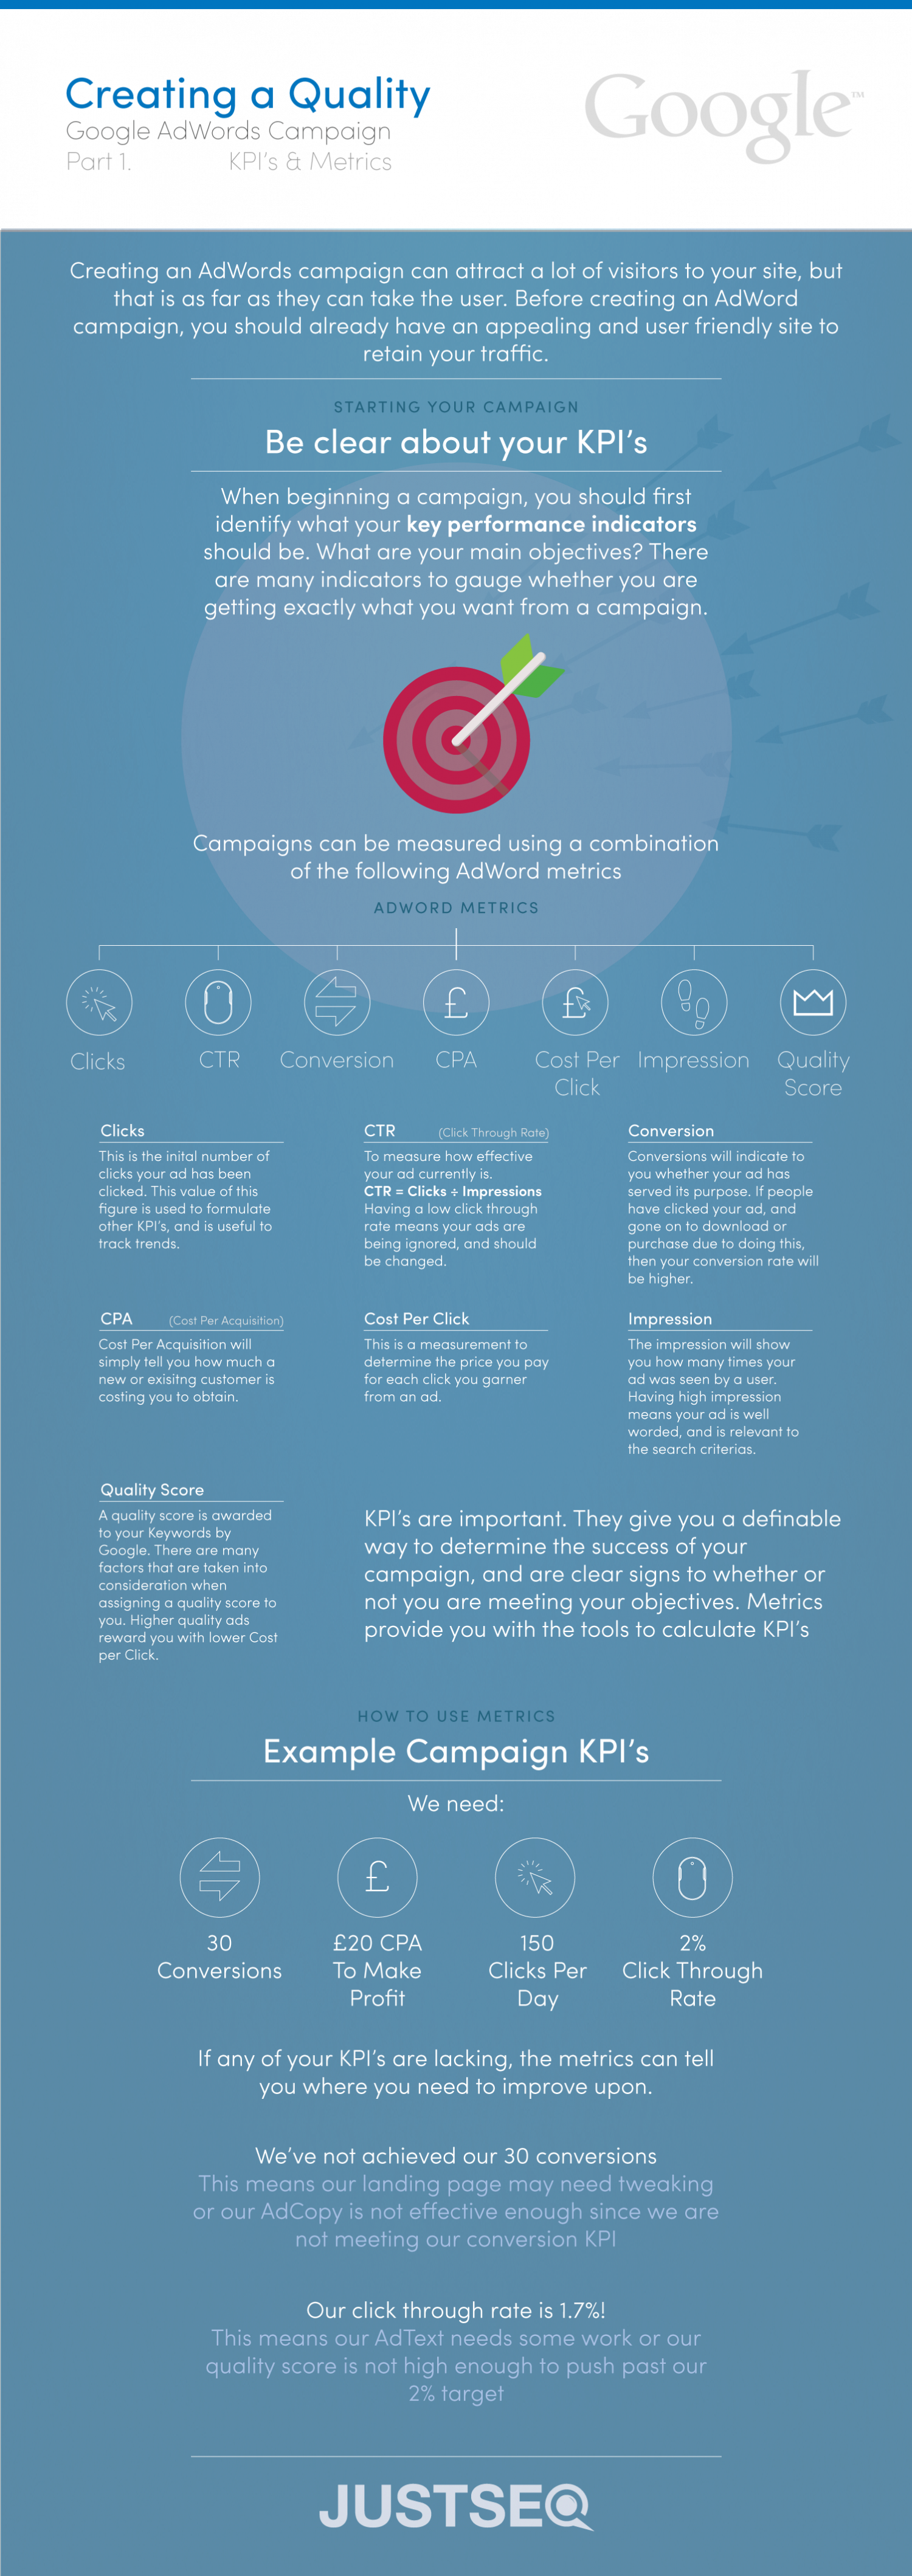 Creating a Quality AdWords Campaign Part 1 Infographic